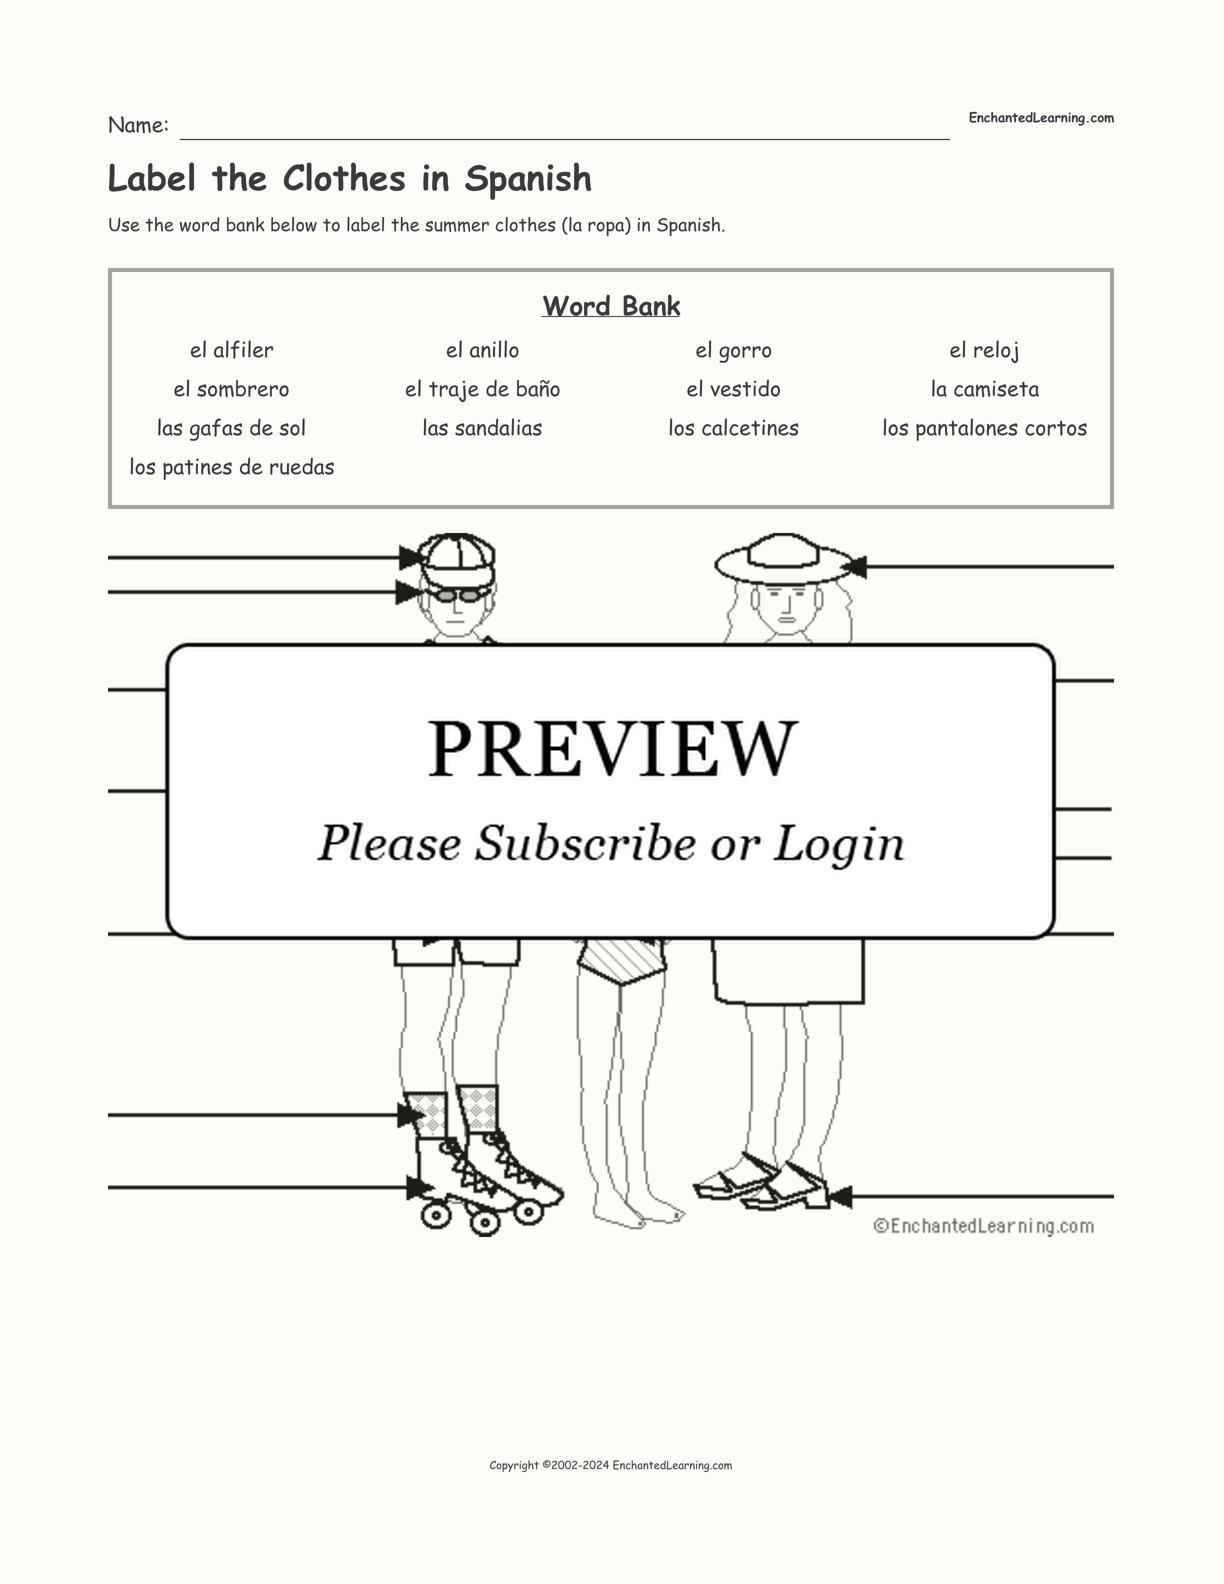 Label the Clothes in Spanish interactive worksheet page 1